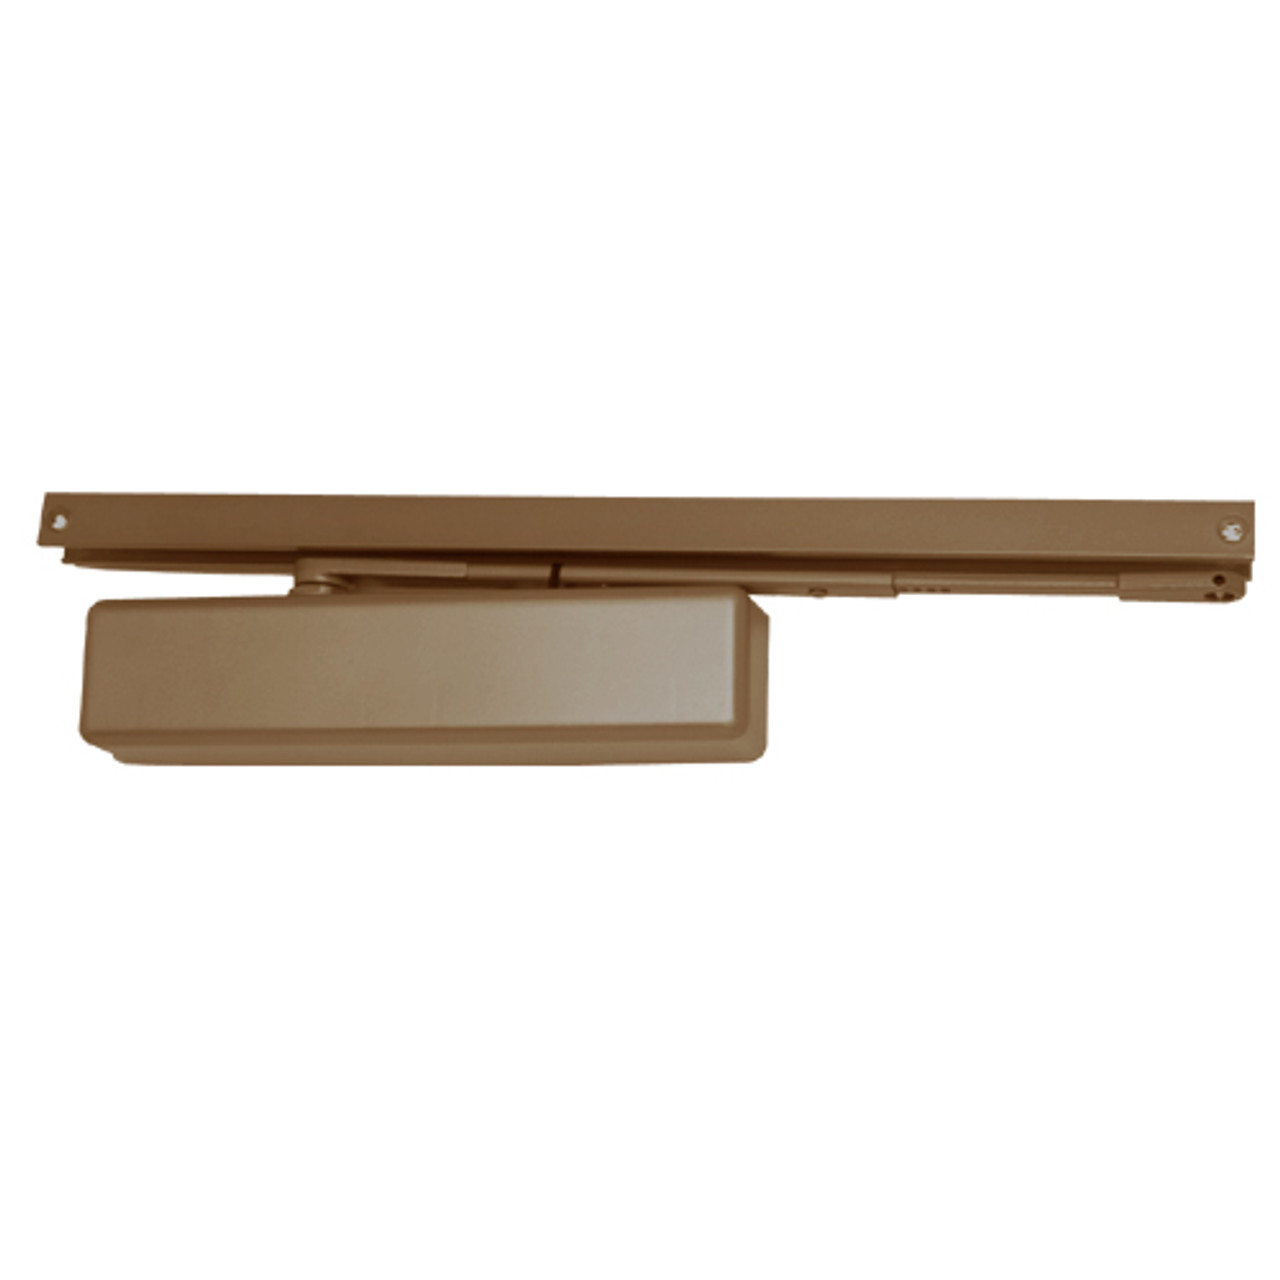 1461T-H-BUMPER-DKBRZ-DS LCN Surface Mount Door Closer with Hold Open Track with Bumper in Dark Bronze Finish